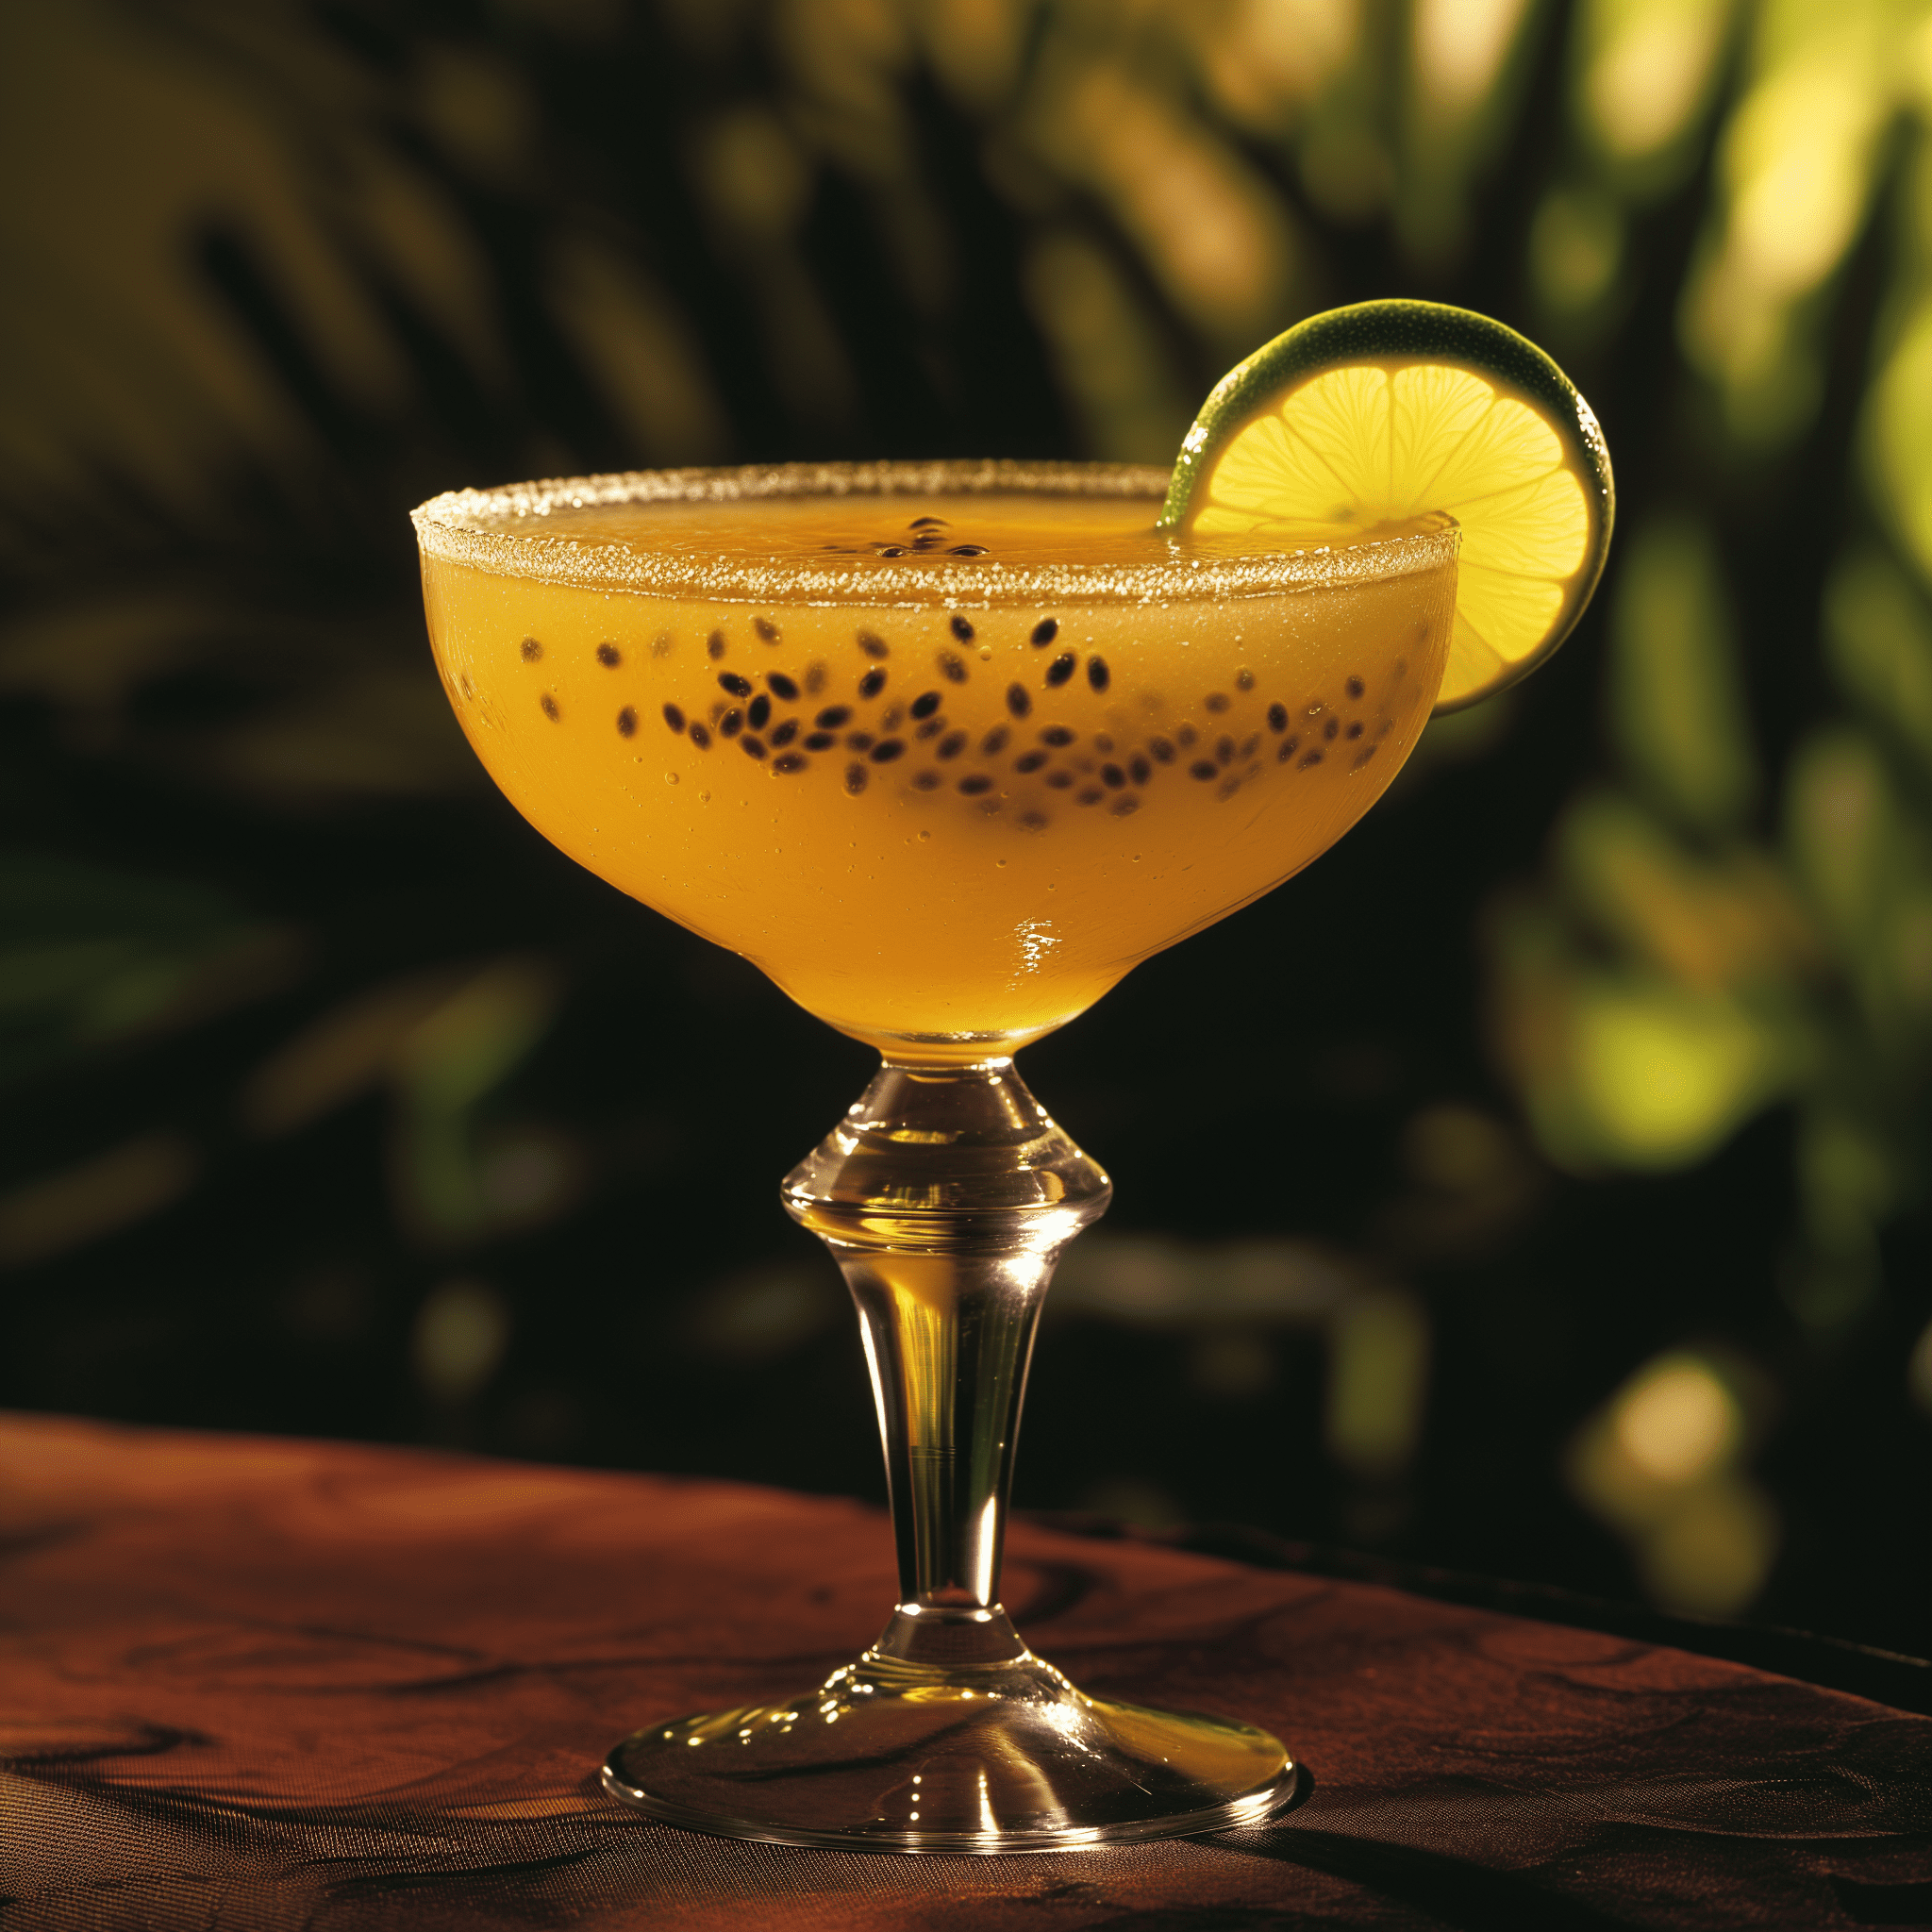 Passion Fruit Daiquiri Cocktail Recipe - The Passion Fruit Daiquiri is a delightful blend of sweet and tart flavors. The passion fruit juice provides a tropical sweetness that's balanced by the sharpness of the lime juice. The rum adds a warm, smooth undertone, making the cocktail both refreshing and potent.